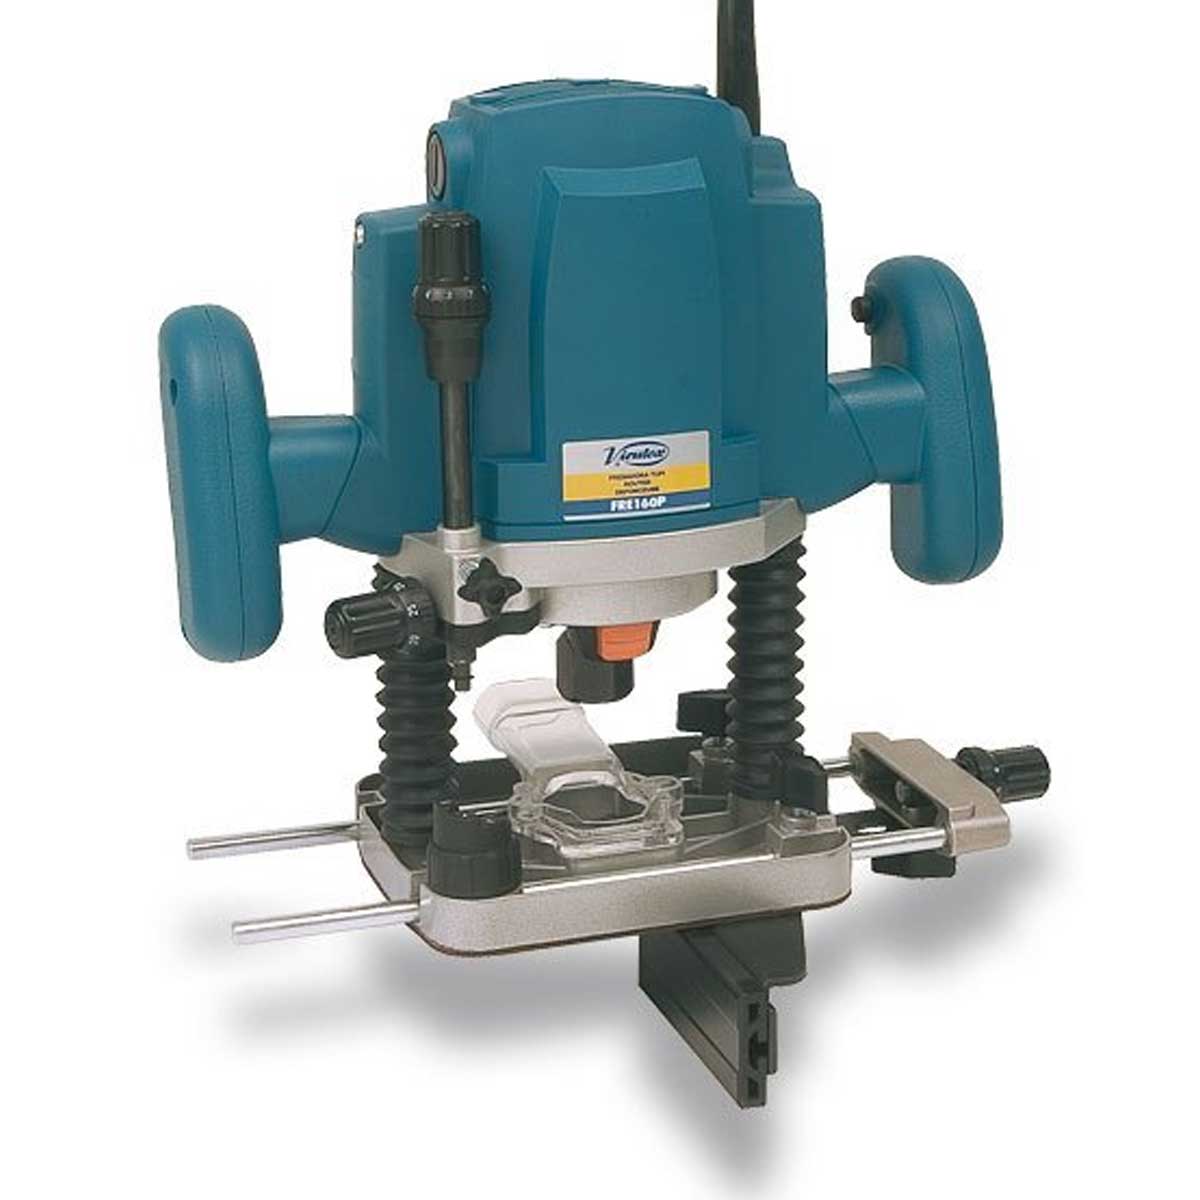 European Hand Router Manufacturers, Suppliers in West Bengal